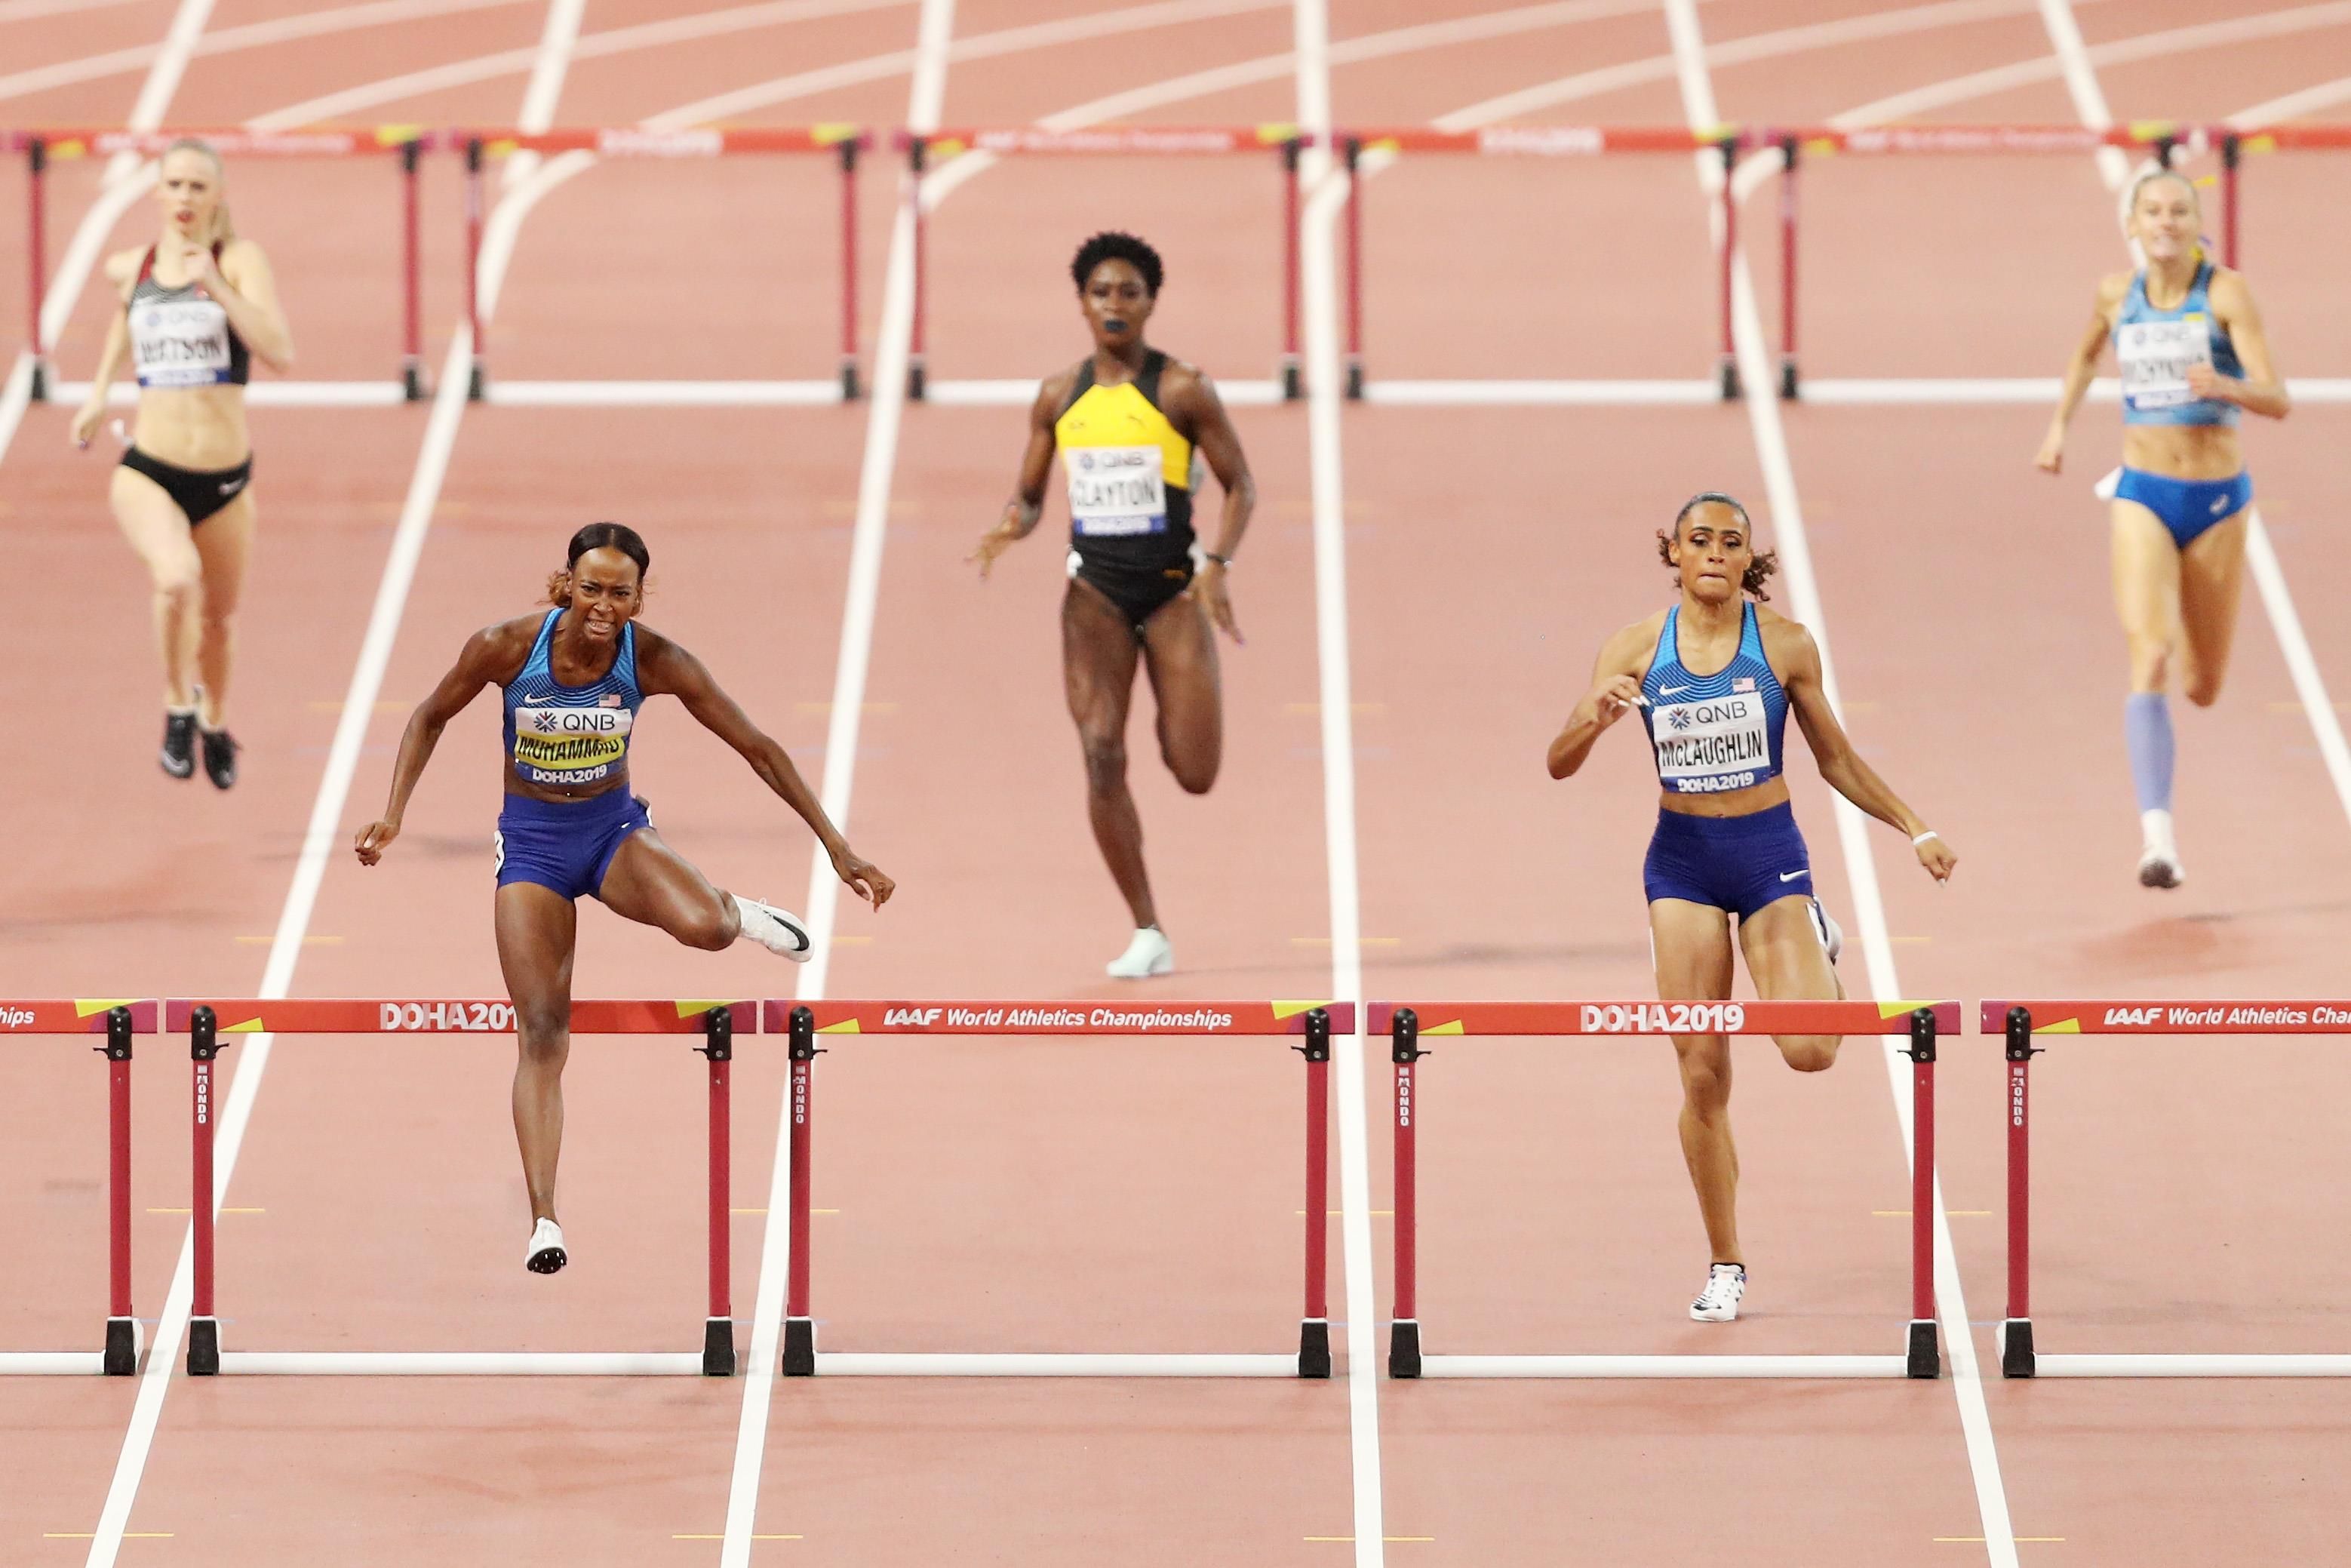 Dalilah Muhammad en route to the world record in the 400m hurdles at the IAAF World Championships Doha 2019